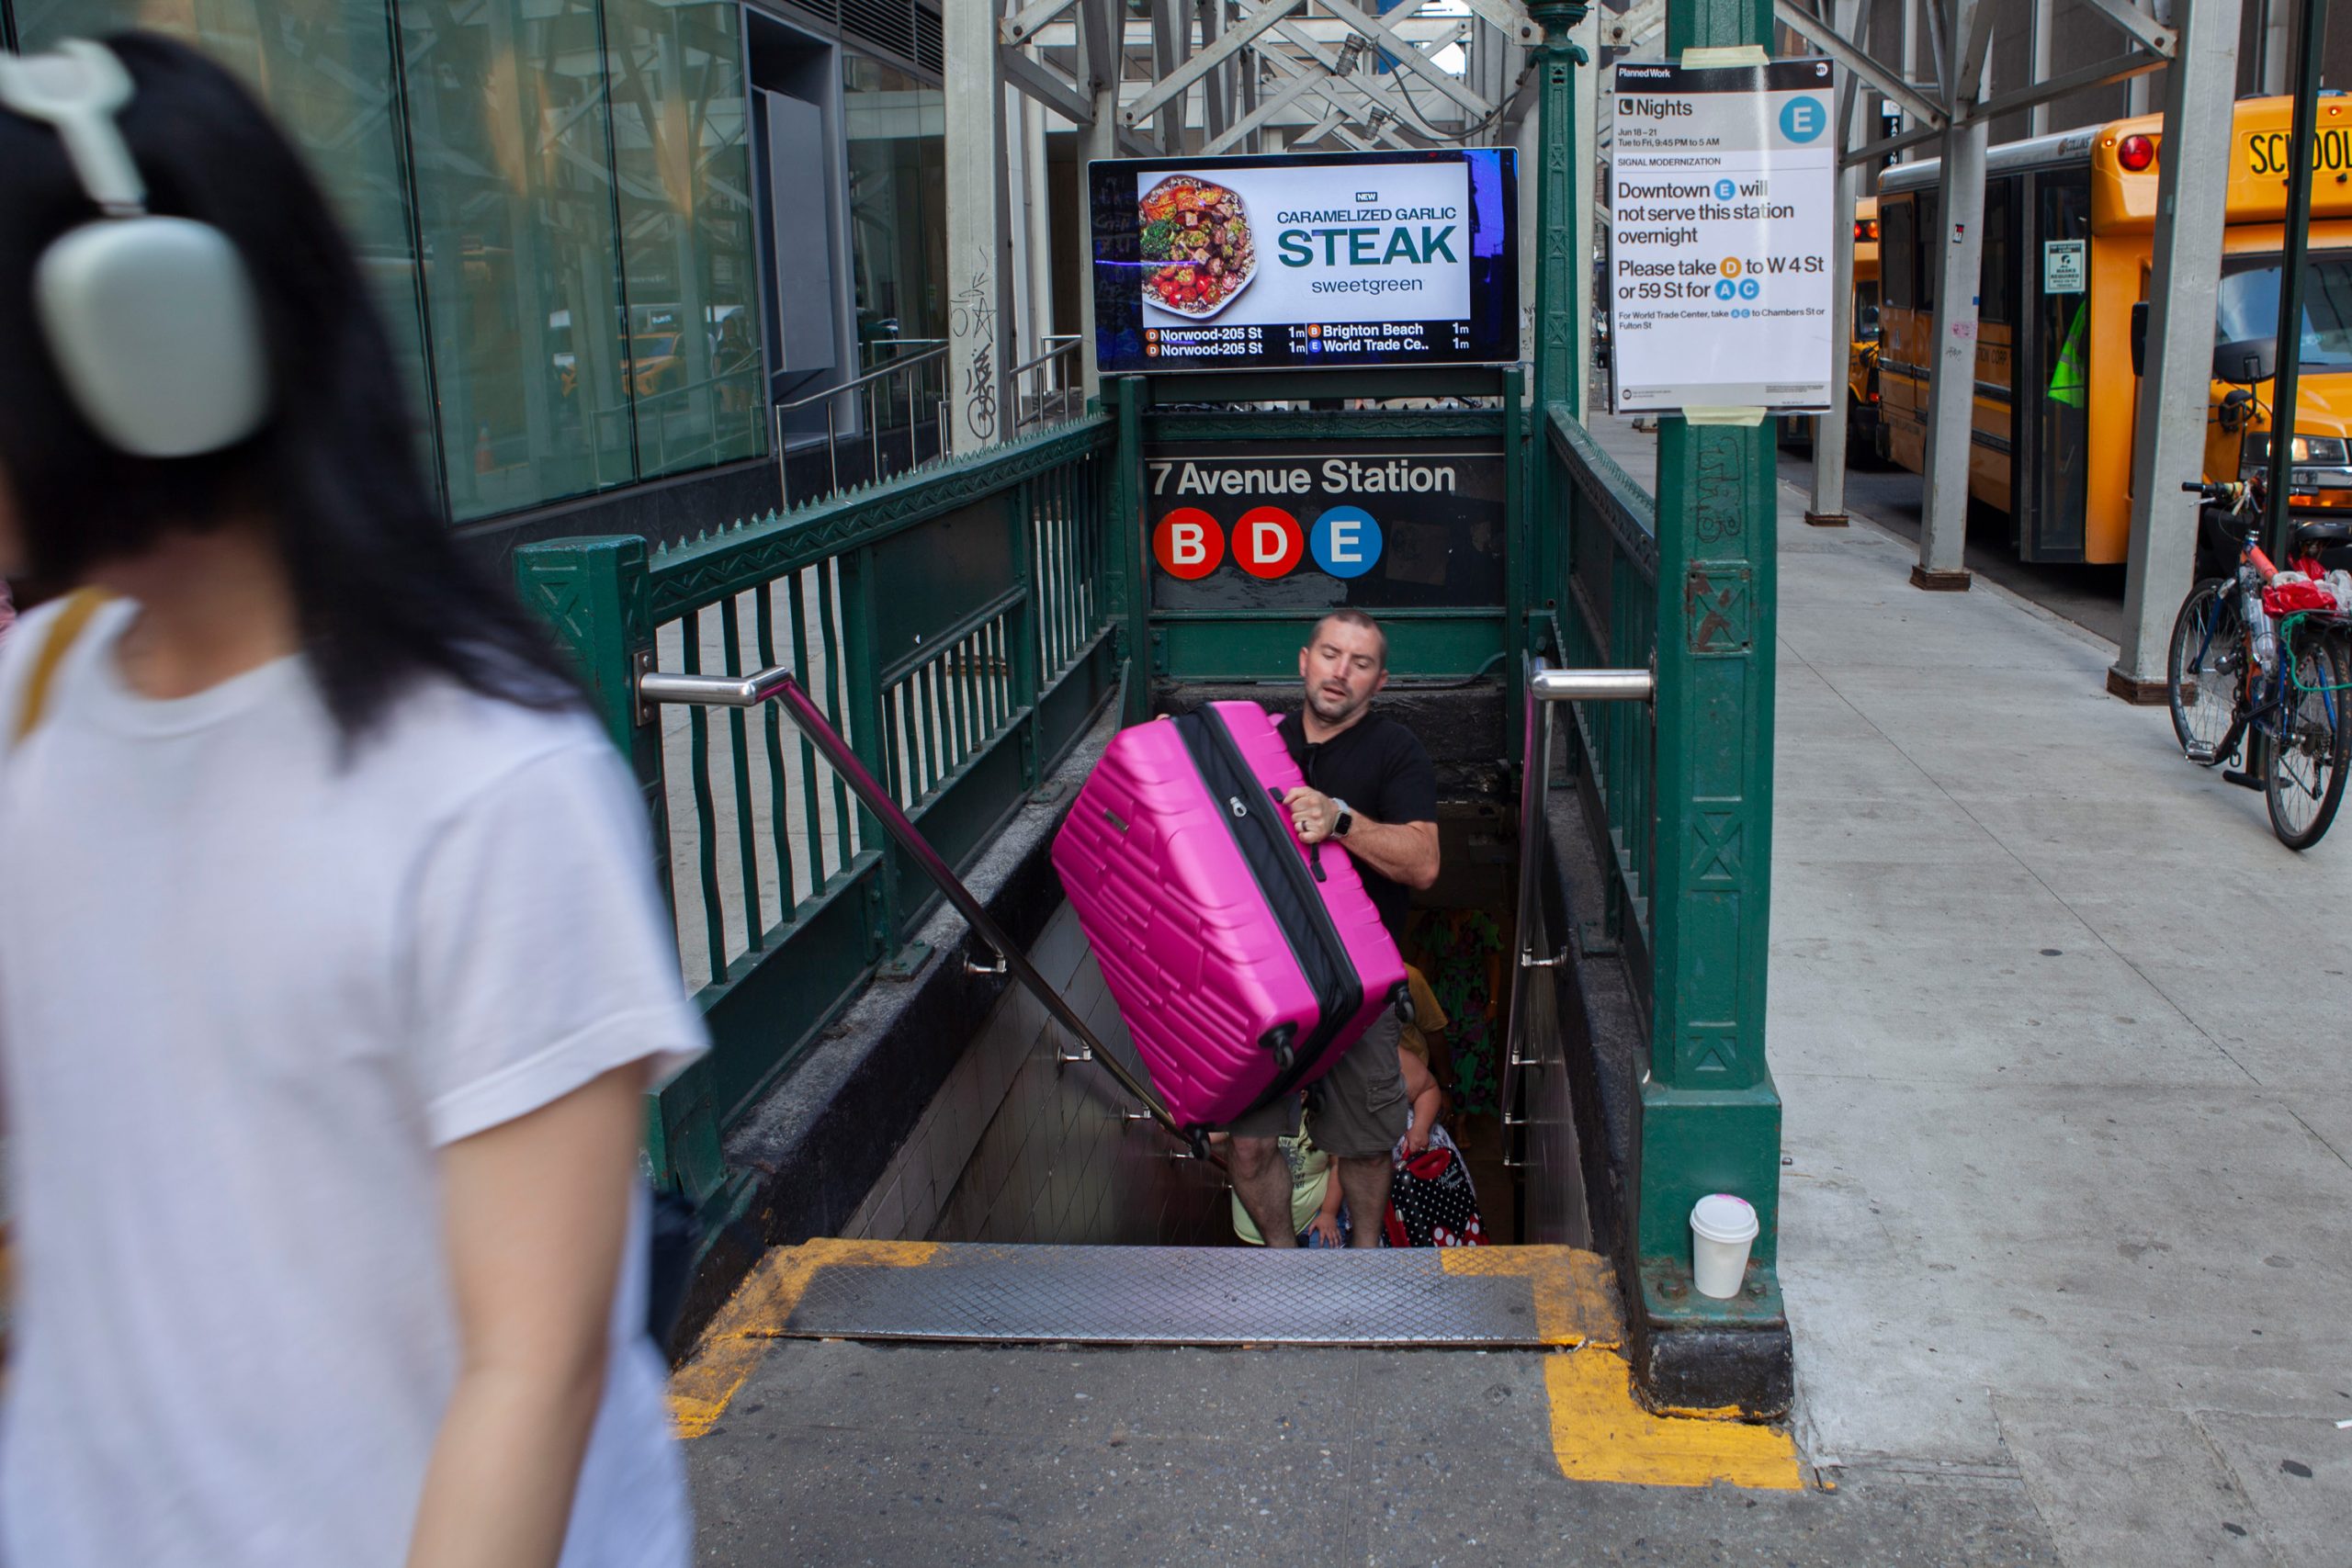 People carry bags up stairs at a subway station without an elevator.